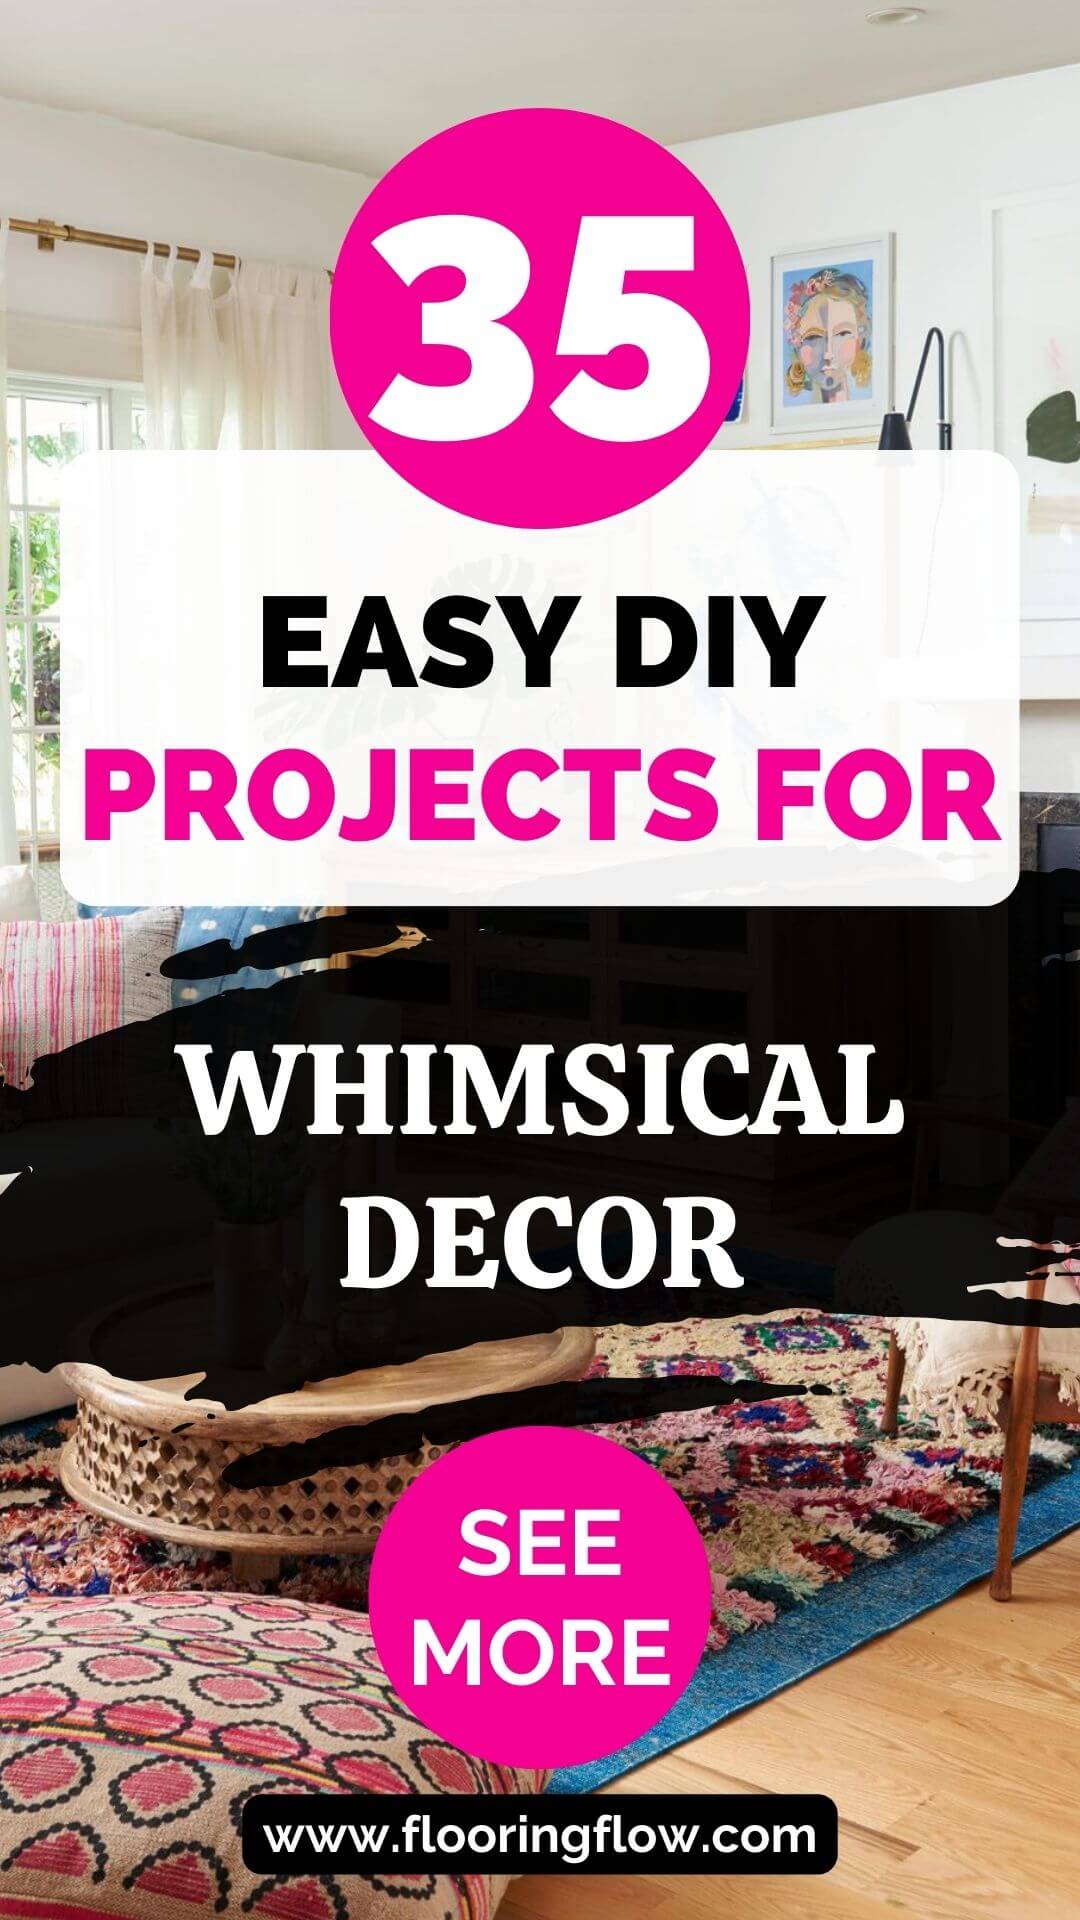 Easy DIY Projects for Whimsical Decor